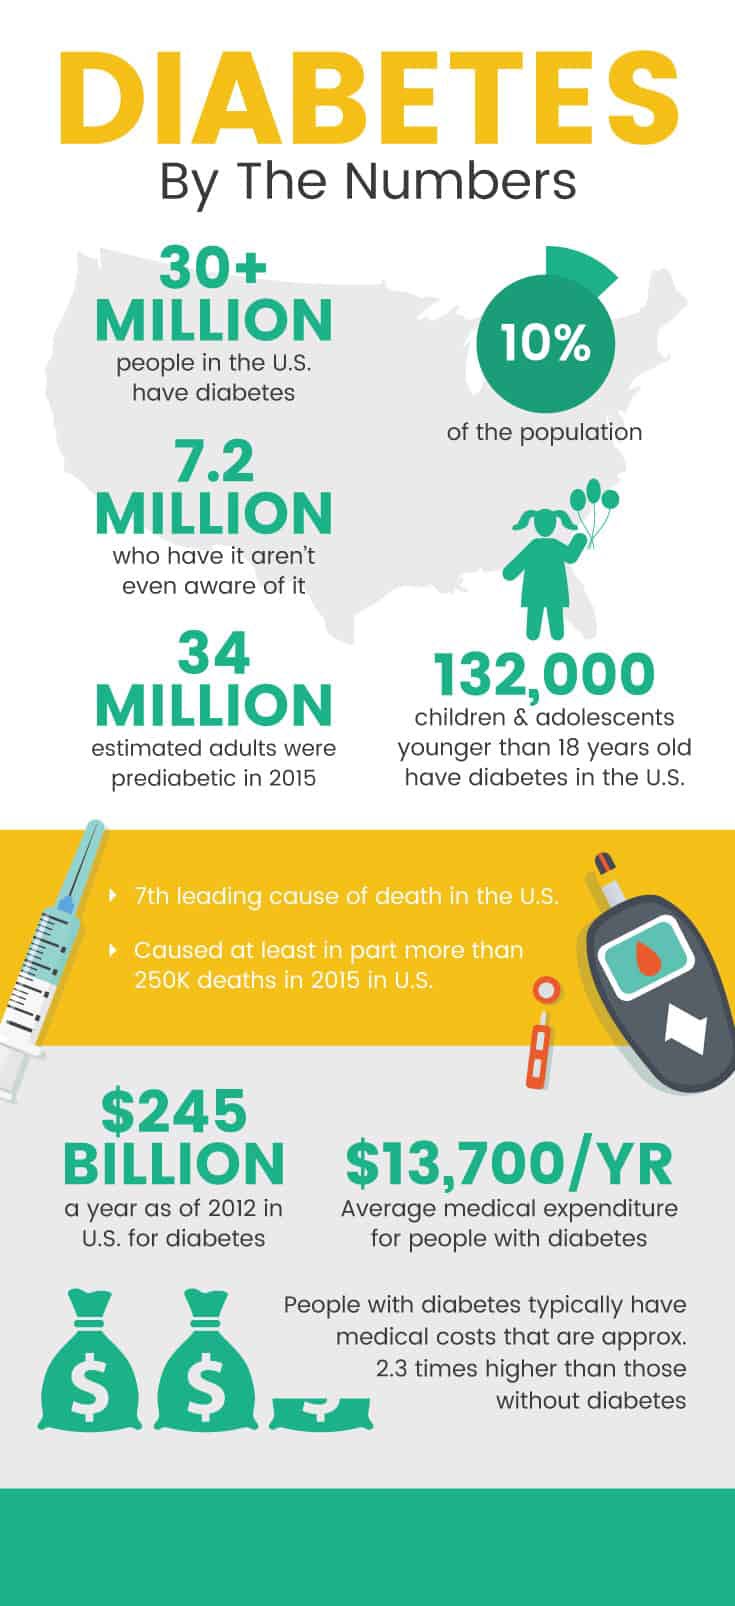 Diabetes by the numbers 